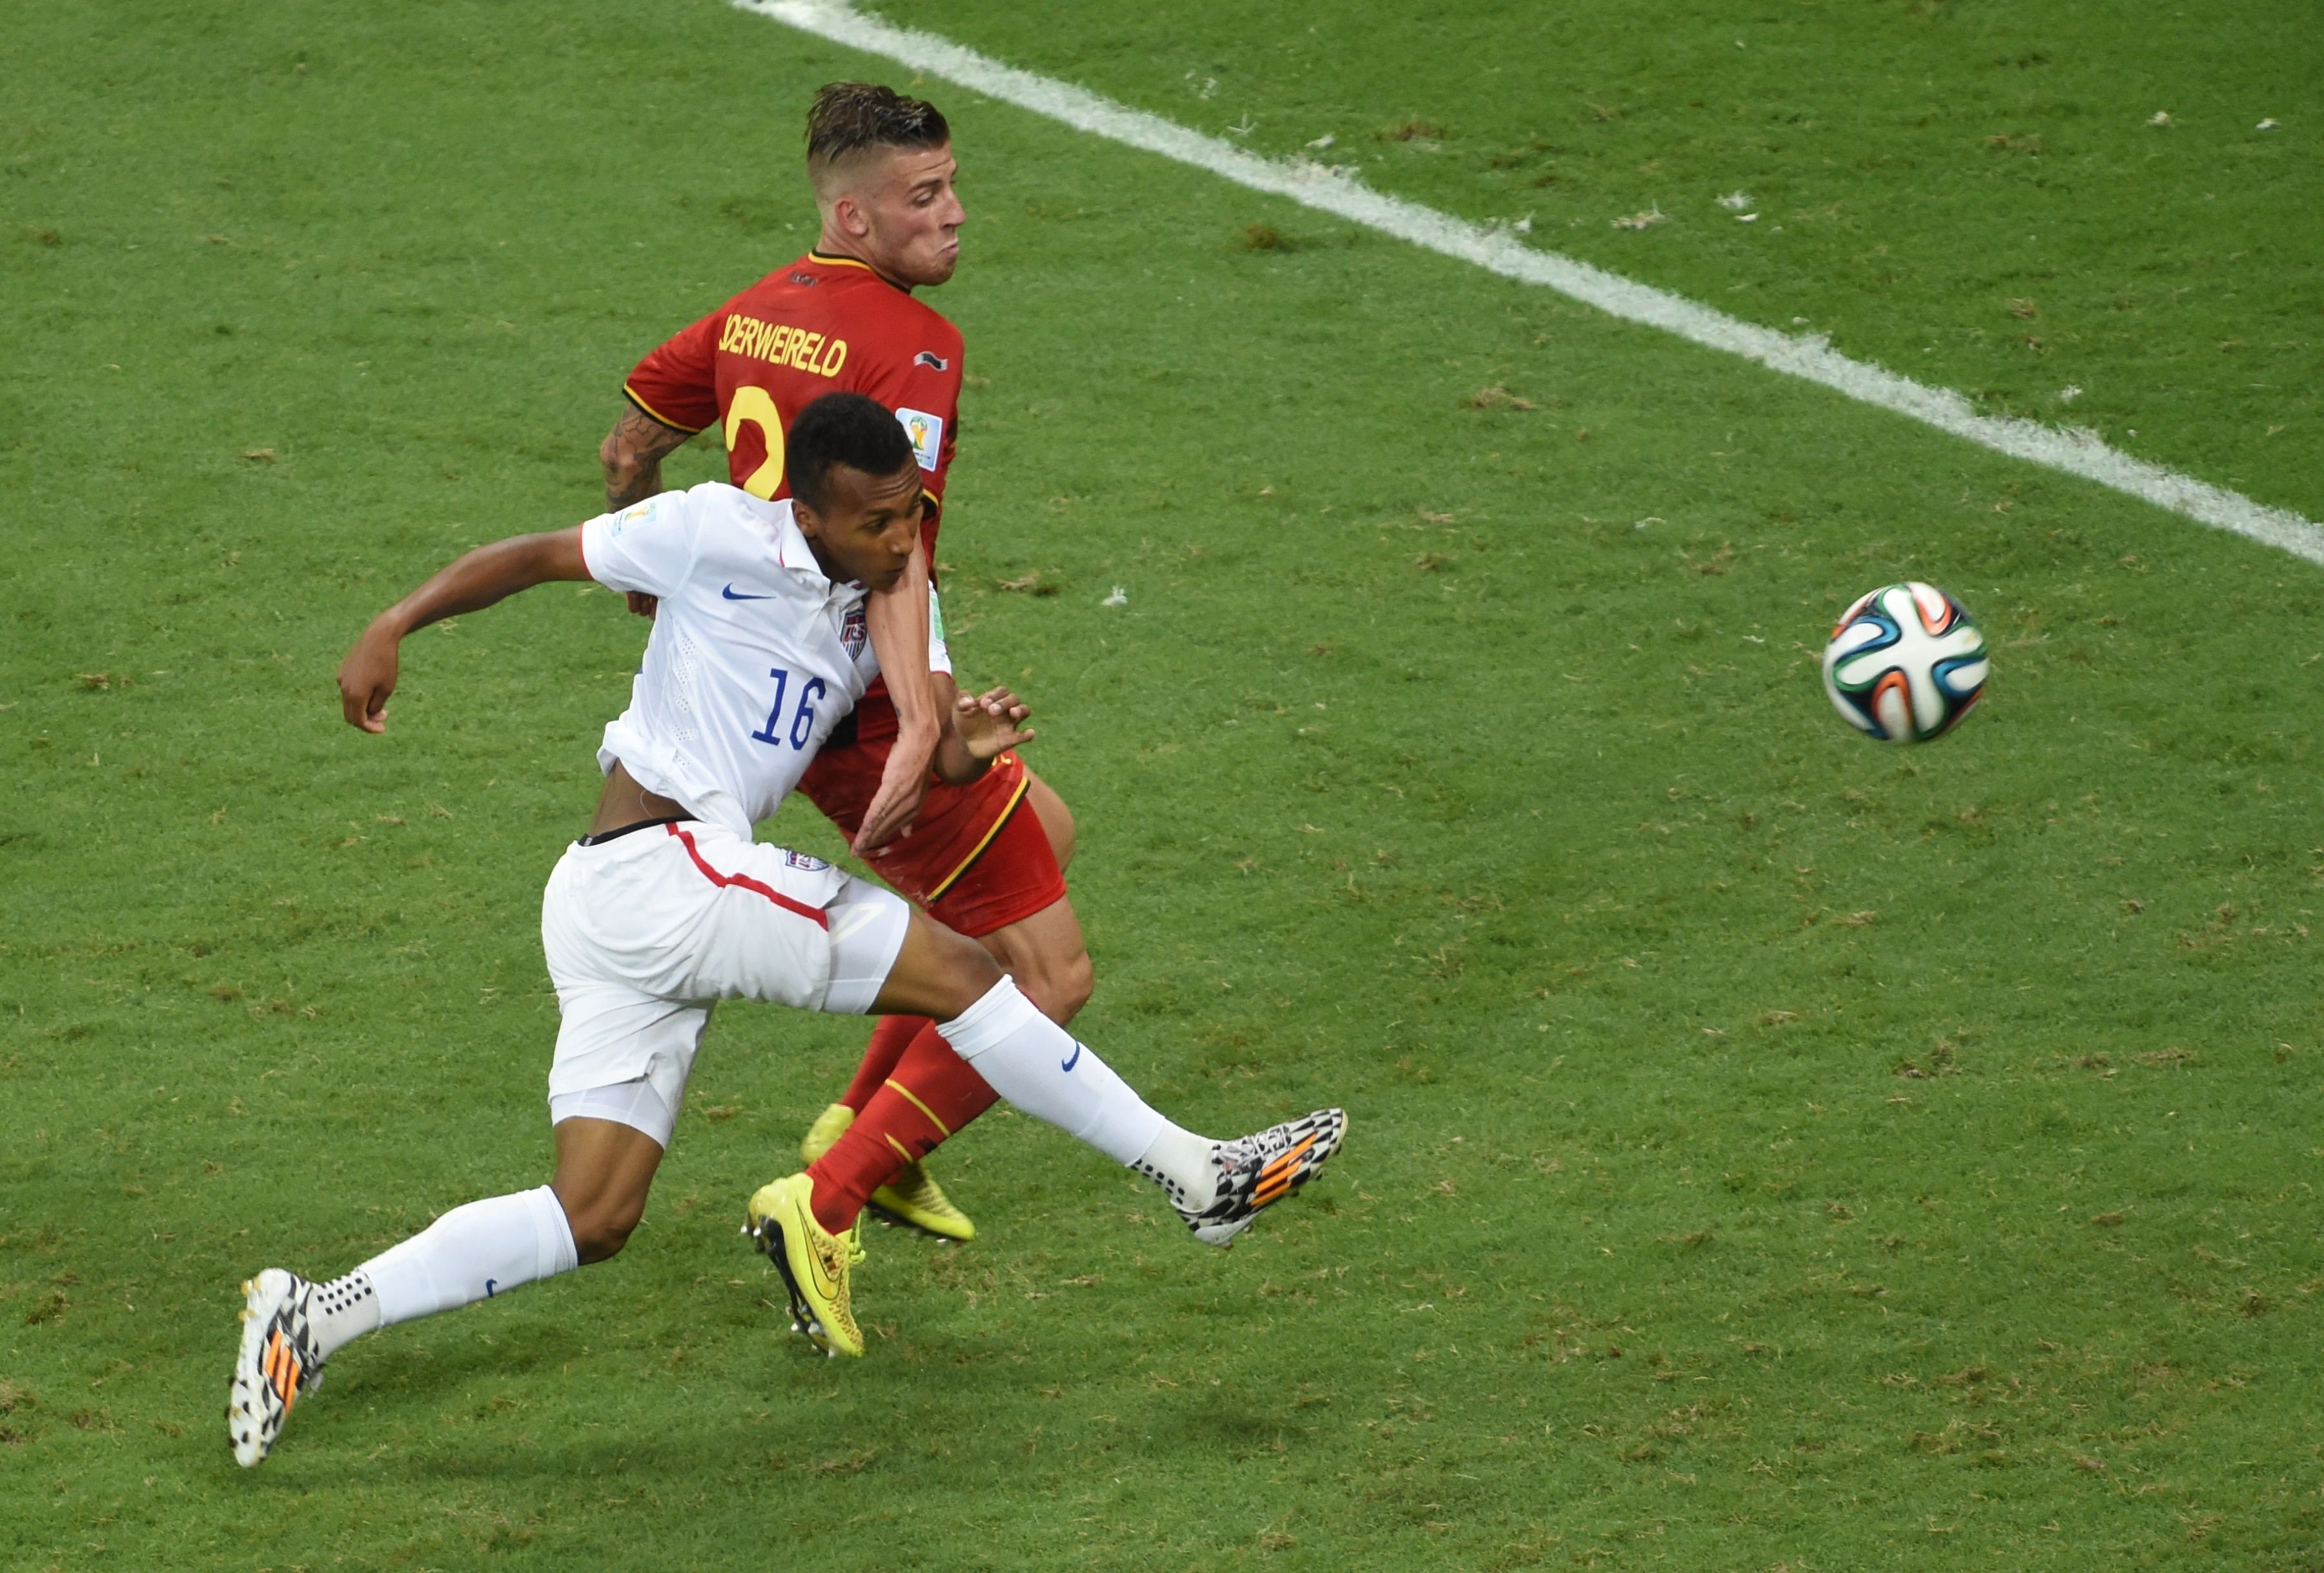 US midfielder Julian Green shoots to score the 2-1 during a Round of 16 football match between Belgium and USA at Fonte Nova Arena in Salvador, Brazil during the 2014 FIFA World Cup on July 1, 2014.